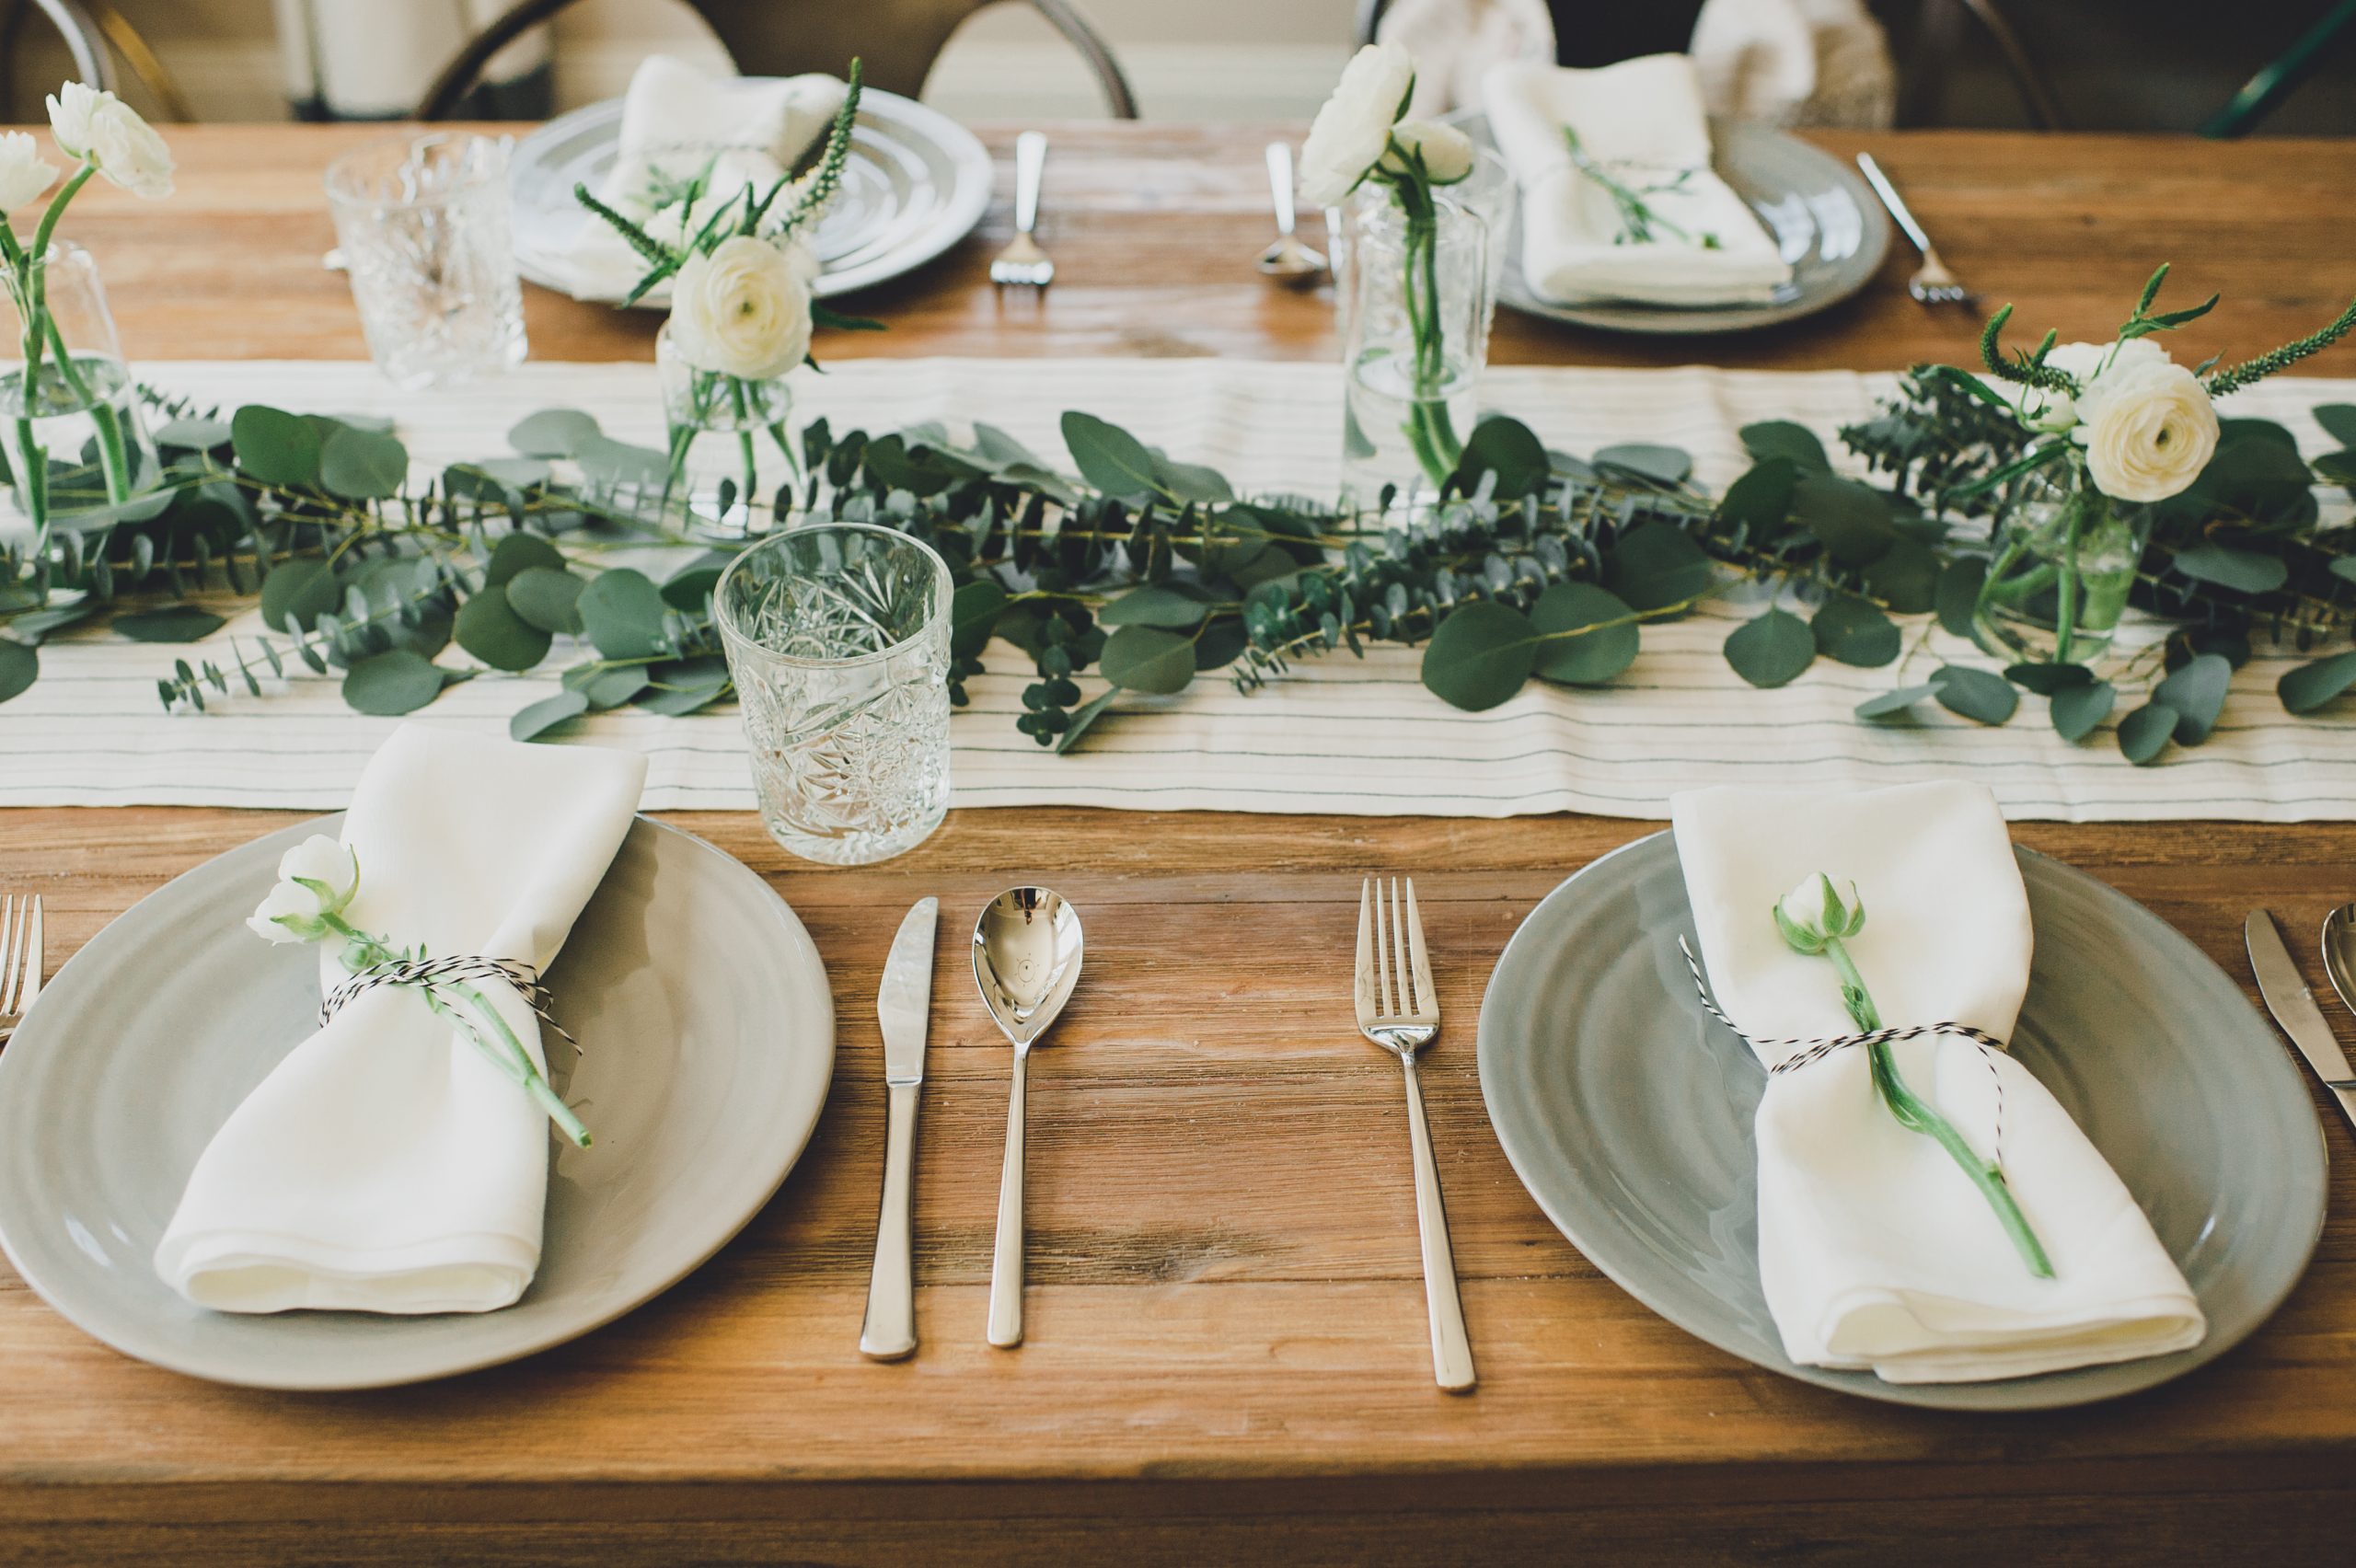 Dinner setting with dinner plates, glasses, flatware and flowers